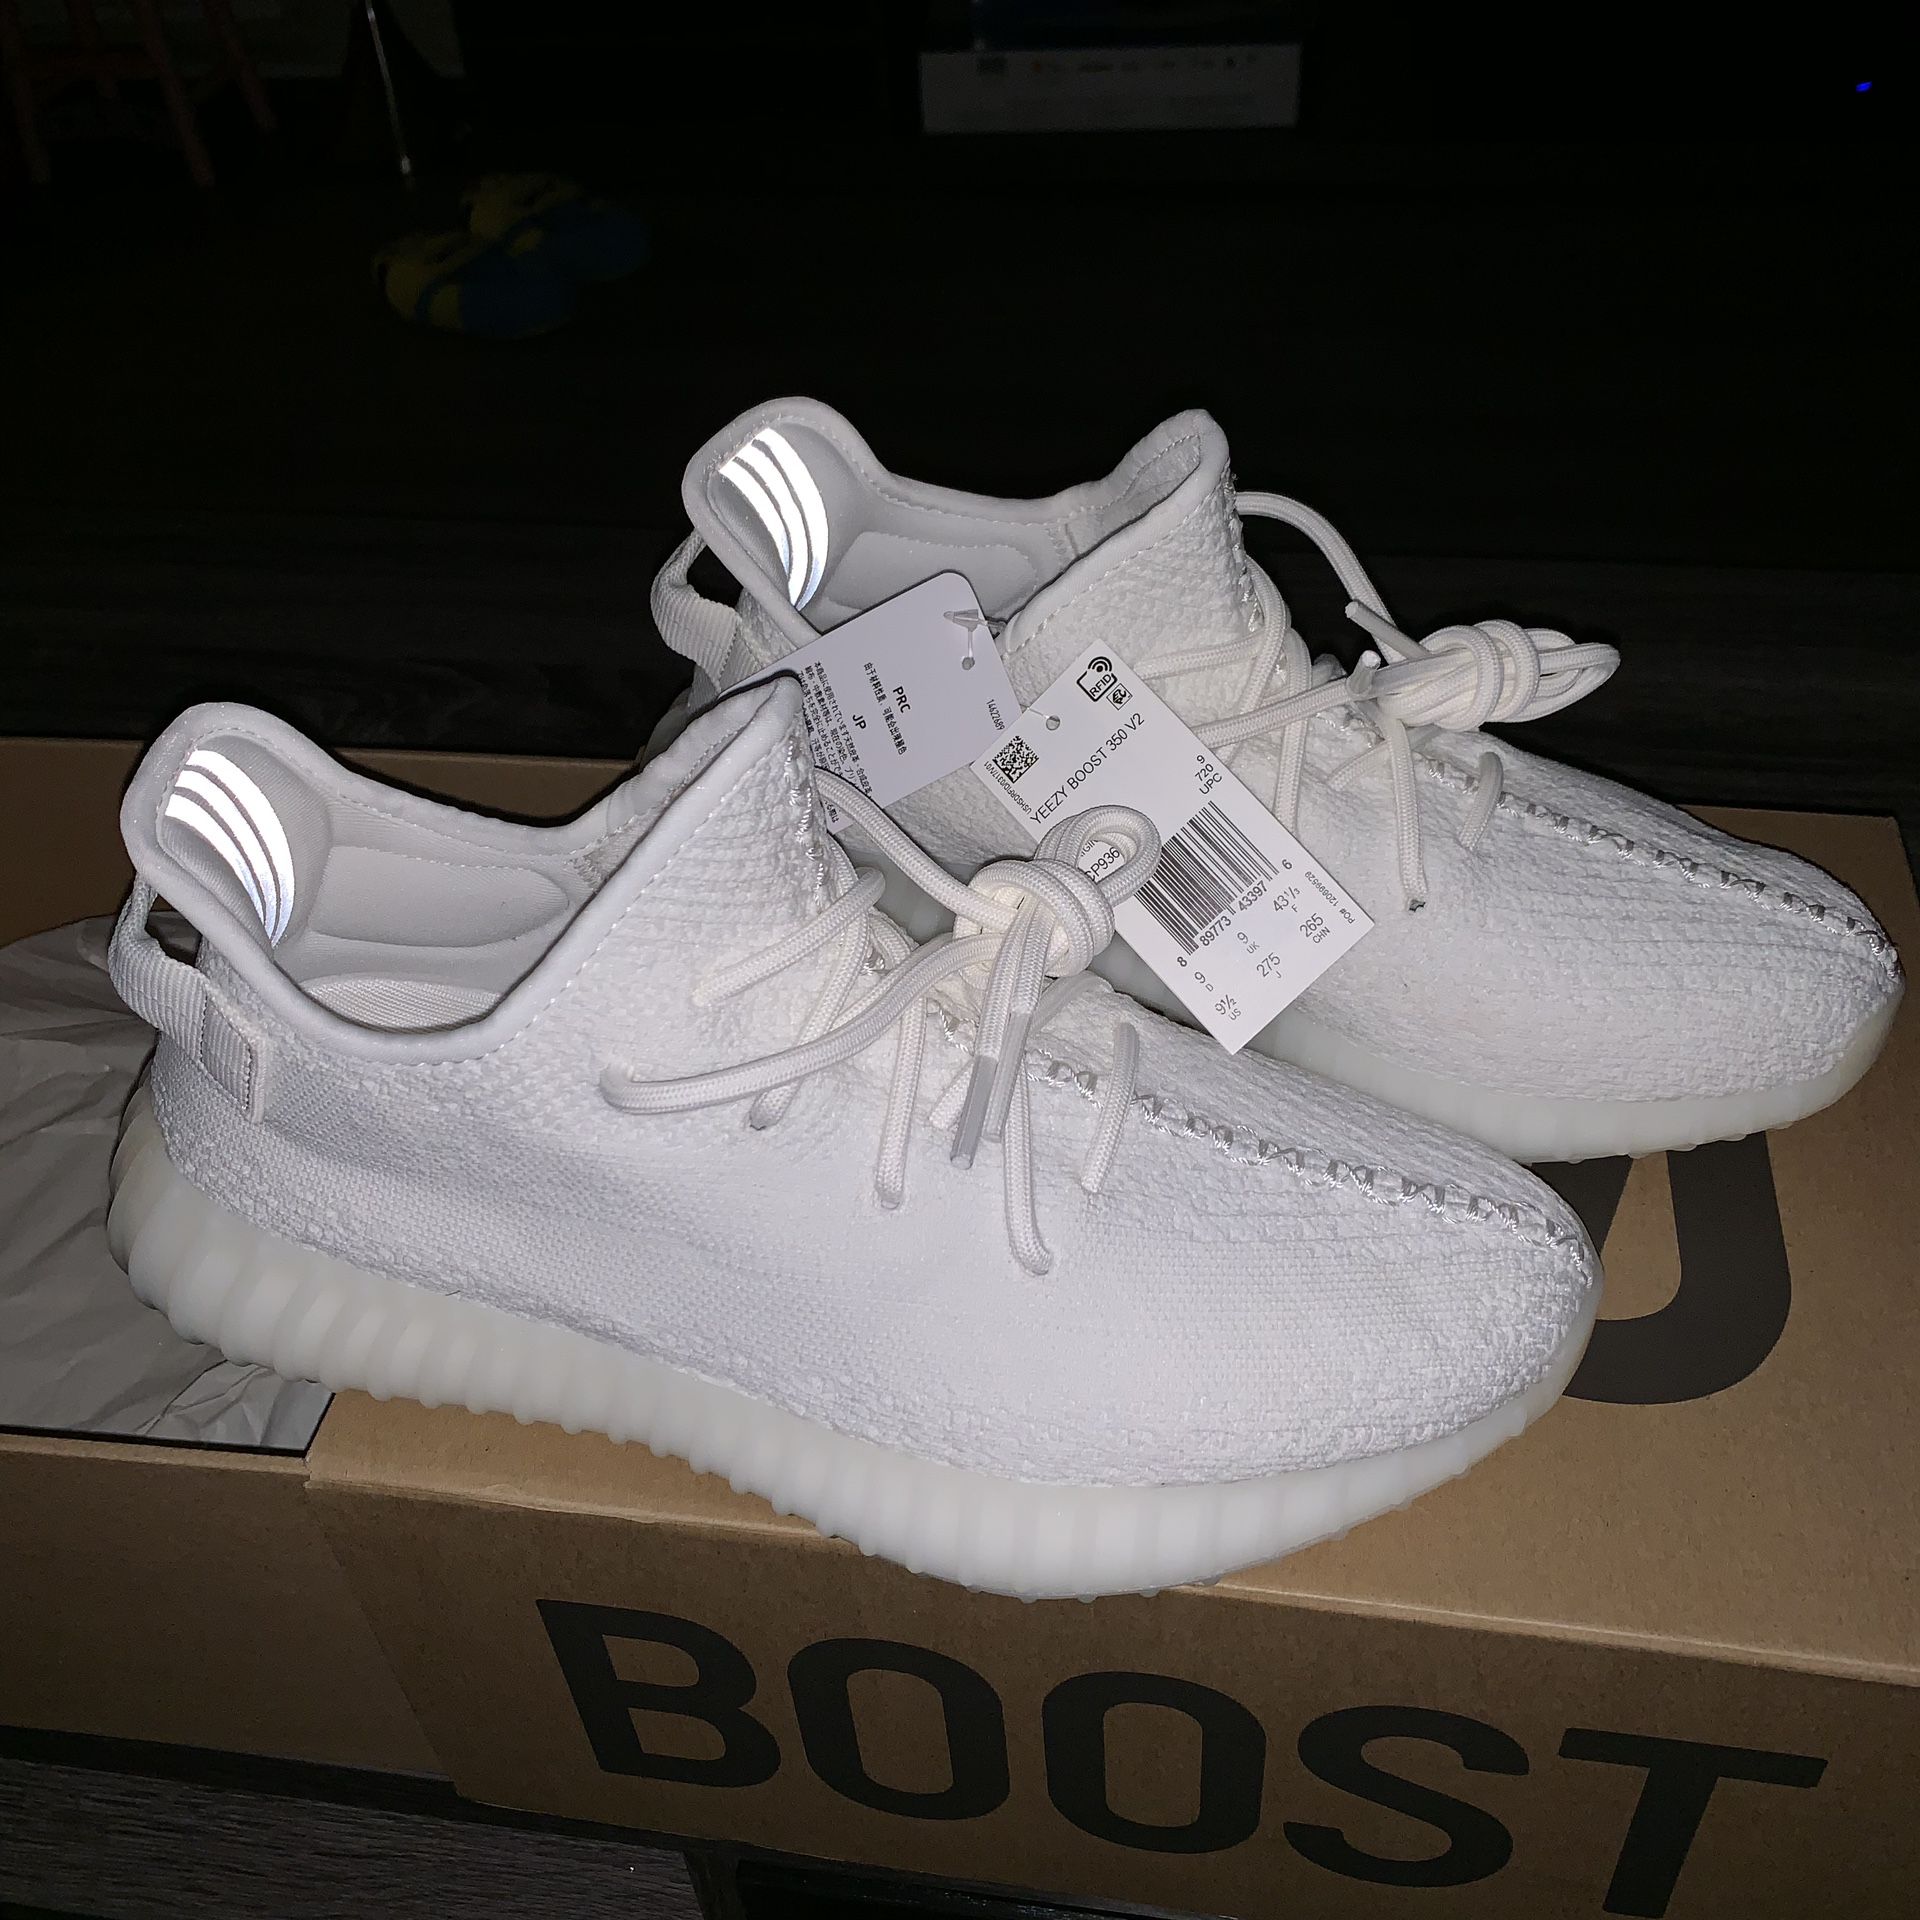 Yeezys Triple White Cream Sz 10.5. Buy Pr Shoes Get Free Supreme T shirt Sz  L for Sale in San Diego, CA - OfferUp